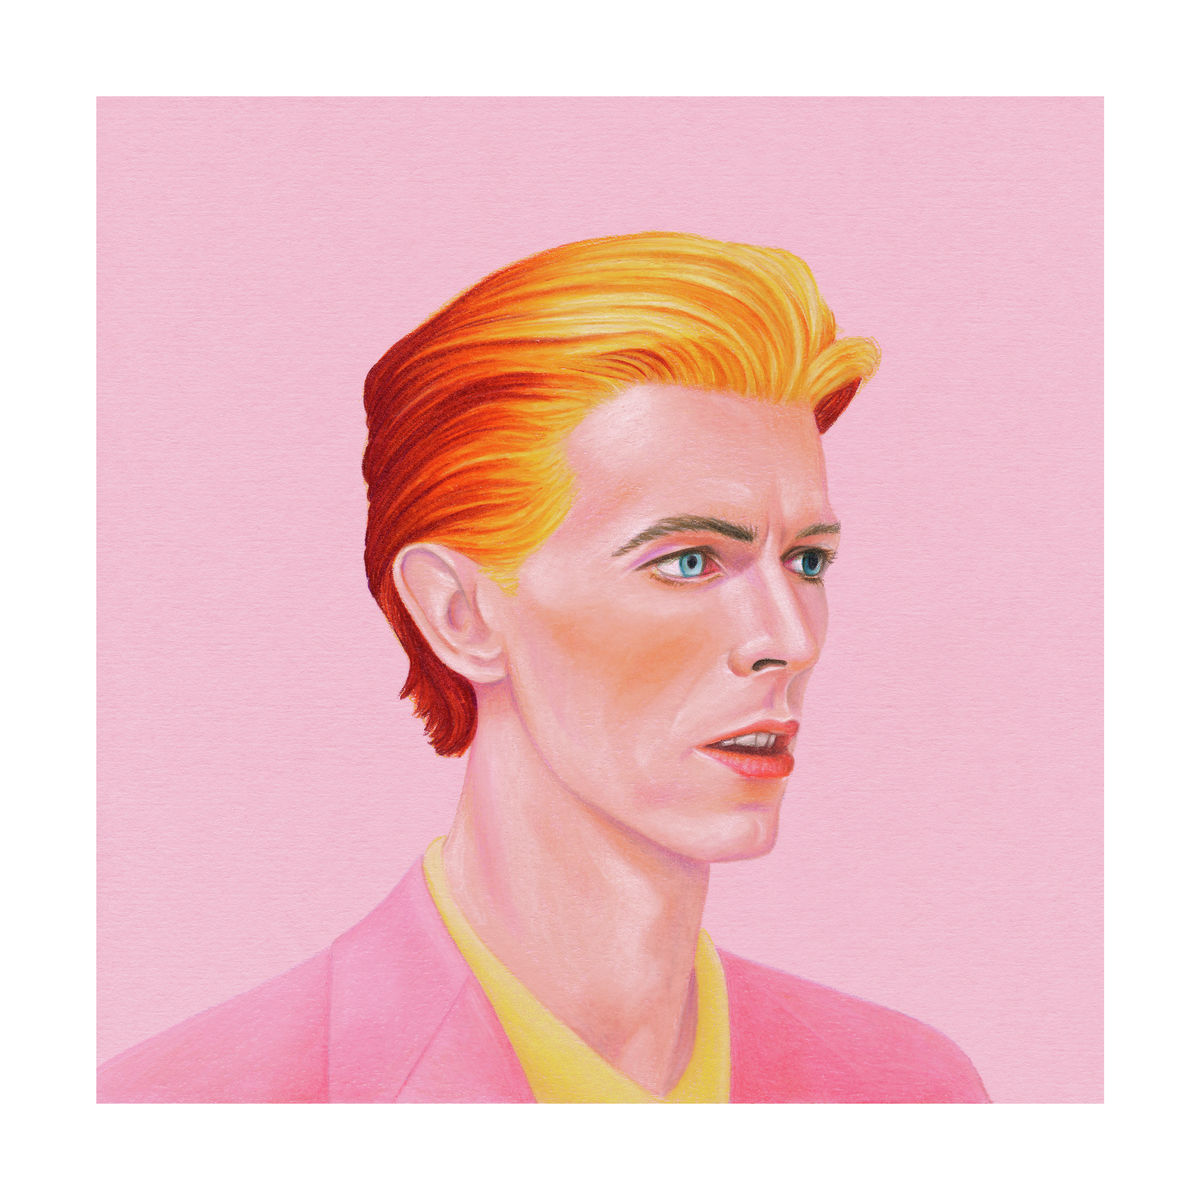 A portrait of the musician, David Bowie (Colour Pencil on Pink Card) Giclee Print